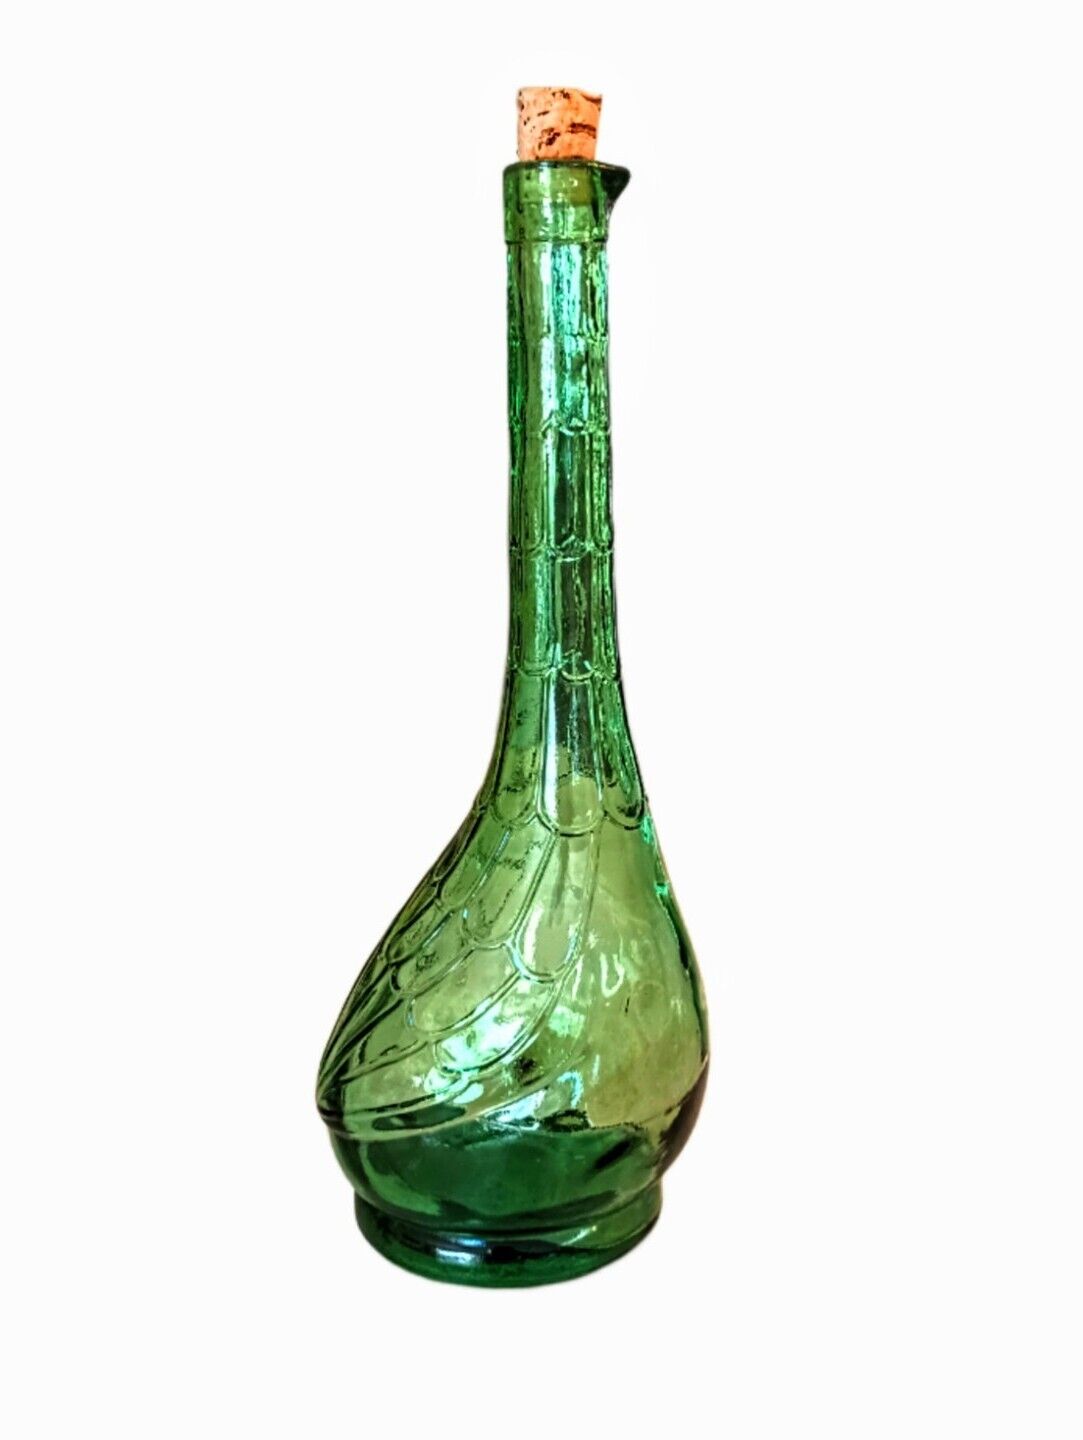 MCM Wine Bottle Glass Decanter Green Collectible Home Decor Vase Gift 